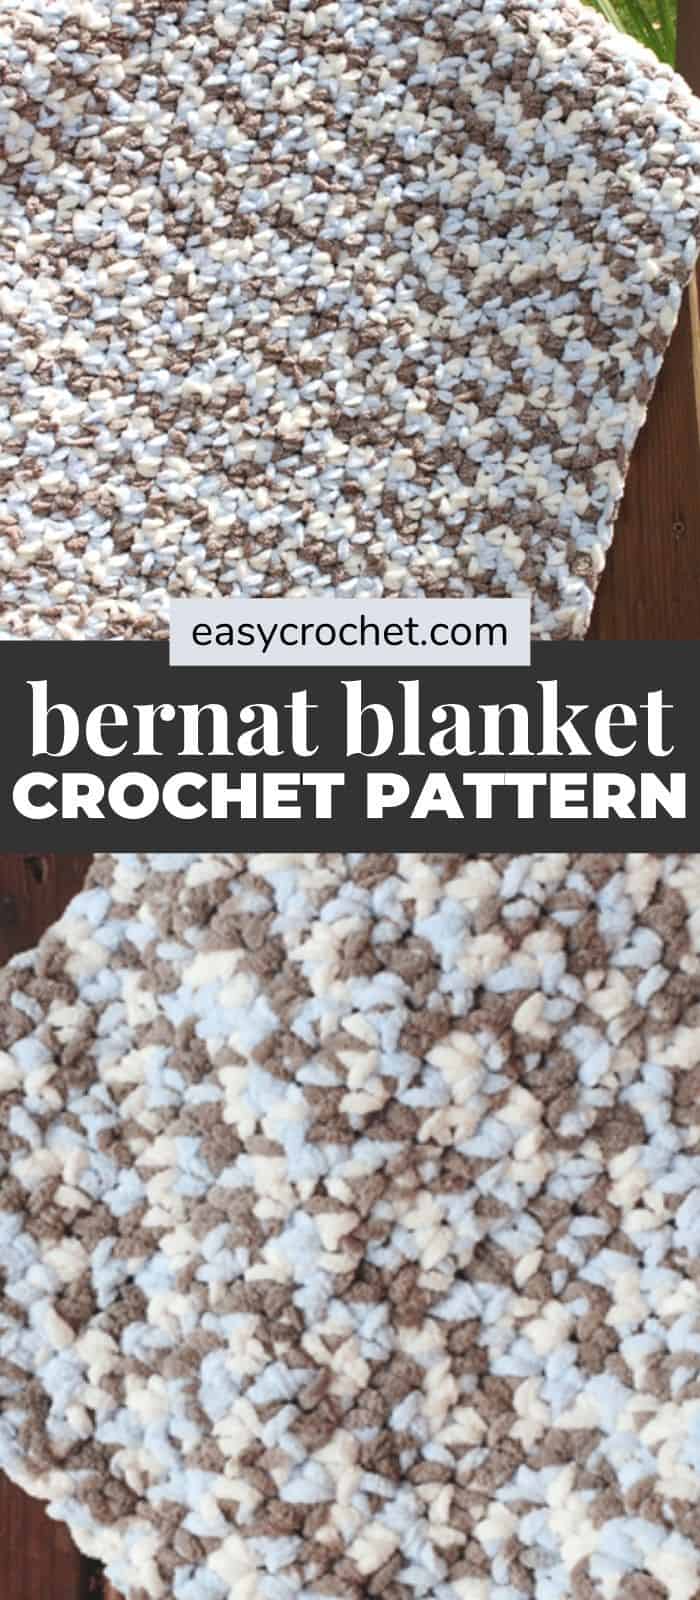 Make this easy to crochet baby blanket with this free crochet pattern from Easy Crochet. Great pattern for new crocheters or beginners. via @easycrochetcom